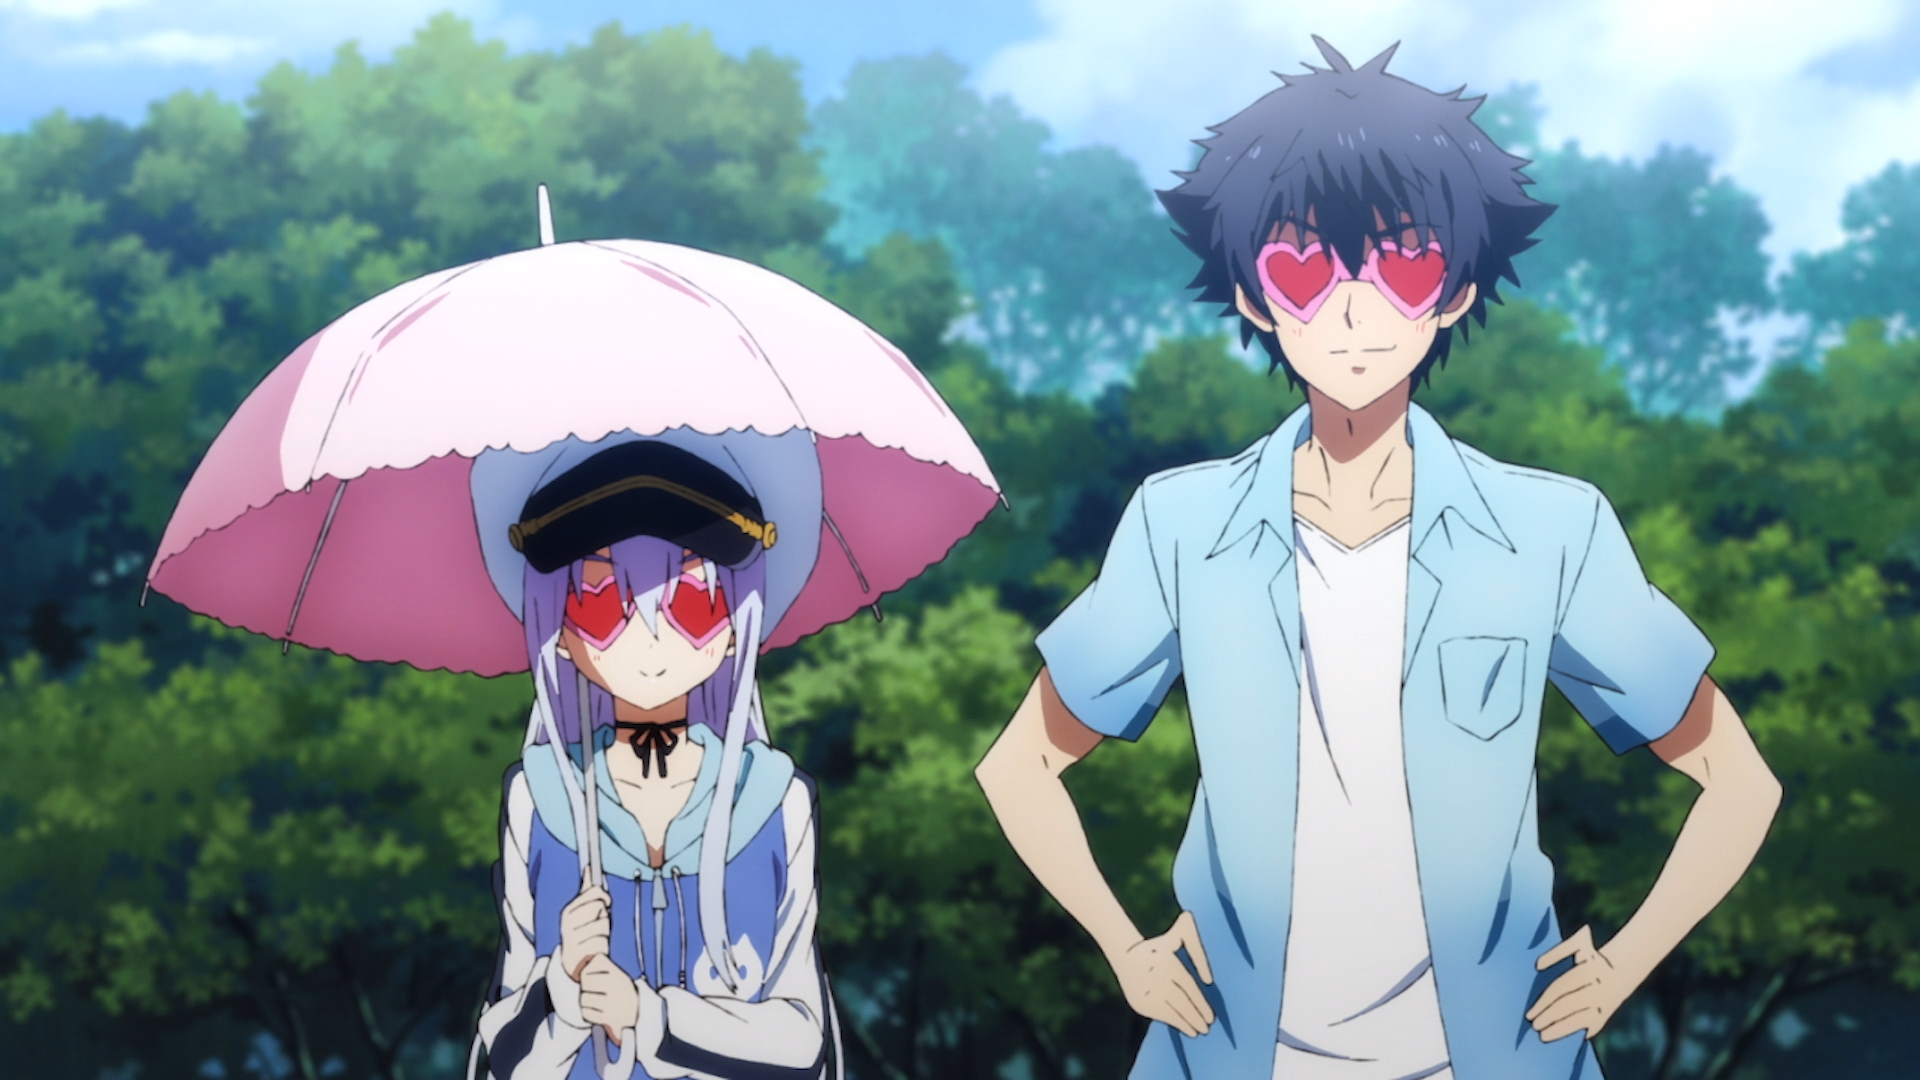 Rinne Ohara and Setsuna Sanzenkai sport a matching pair of funky, heart-shaped sunglasses in a scene from the 2018 ISLAND TV anime.